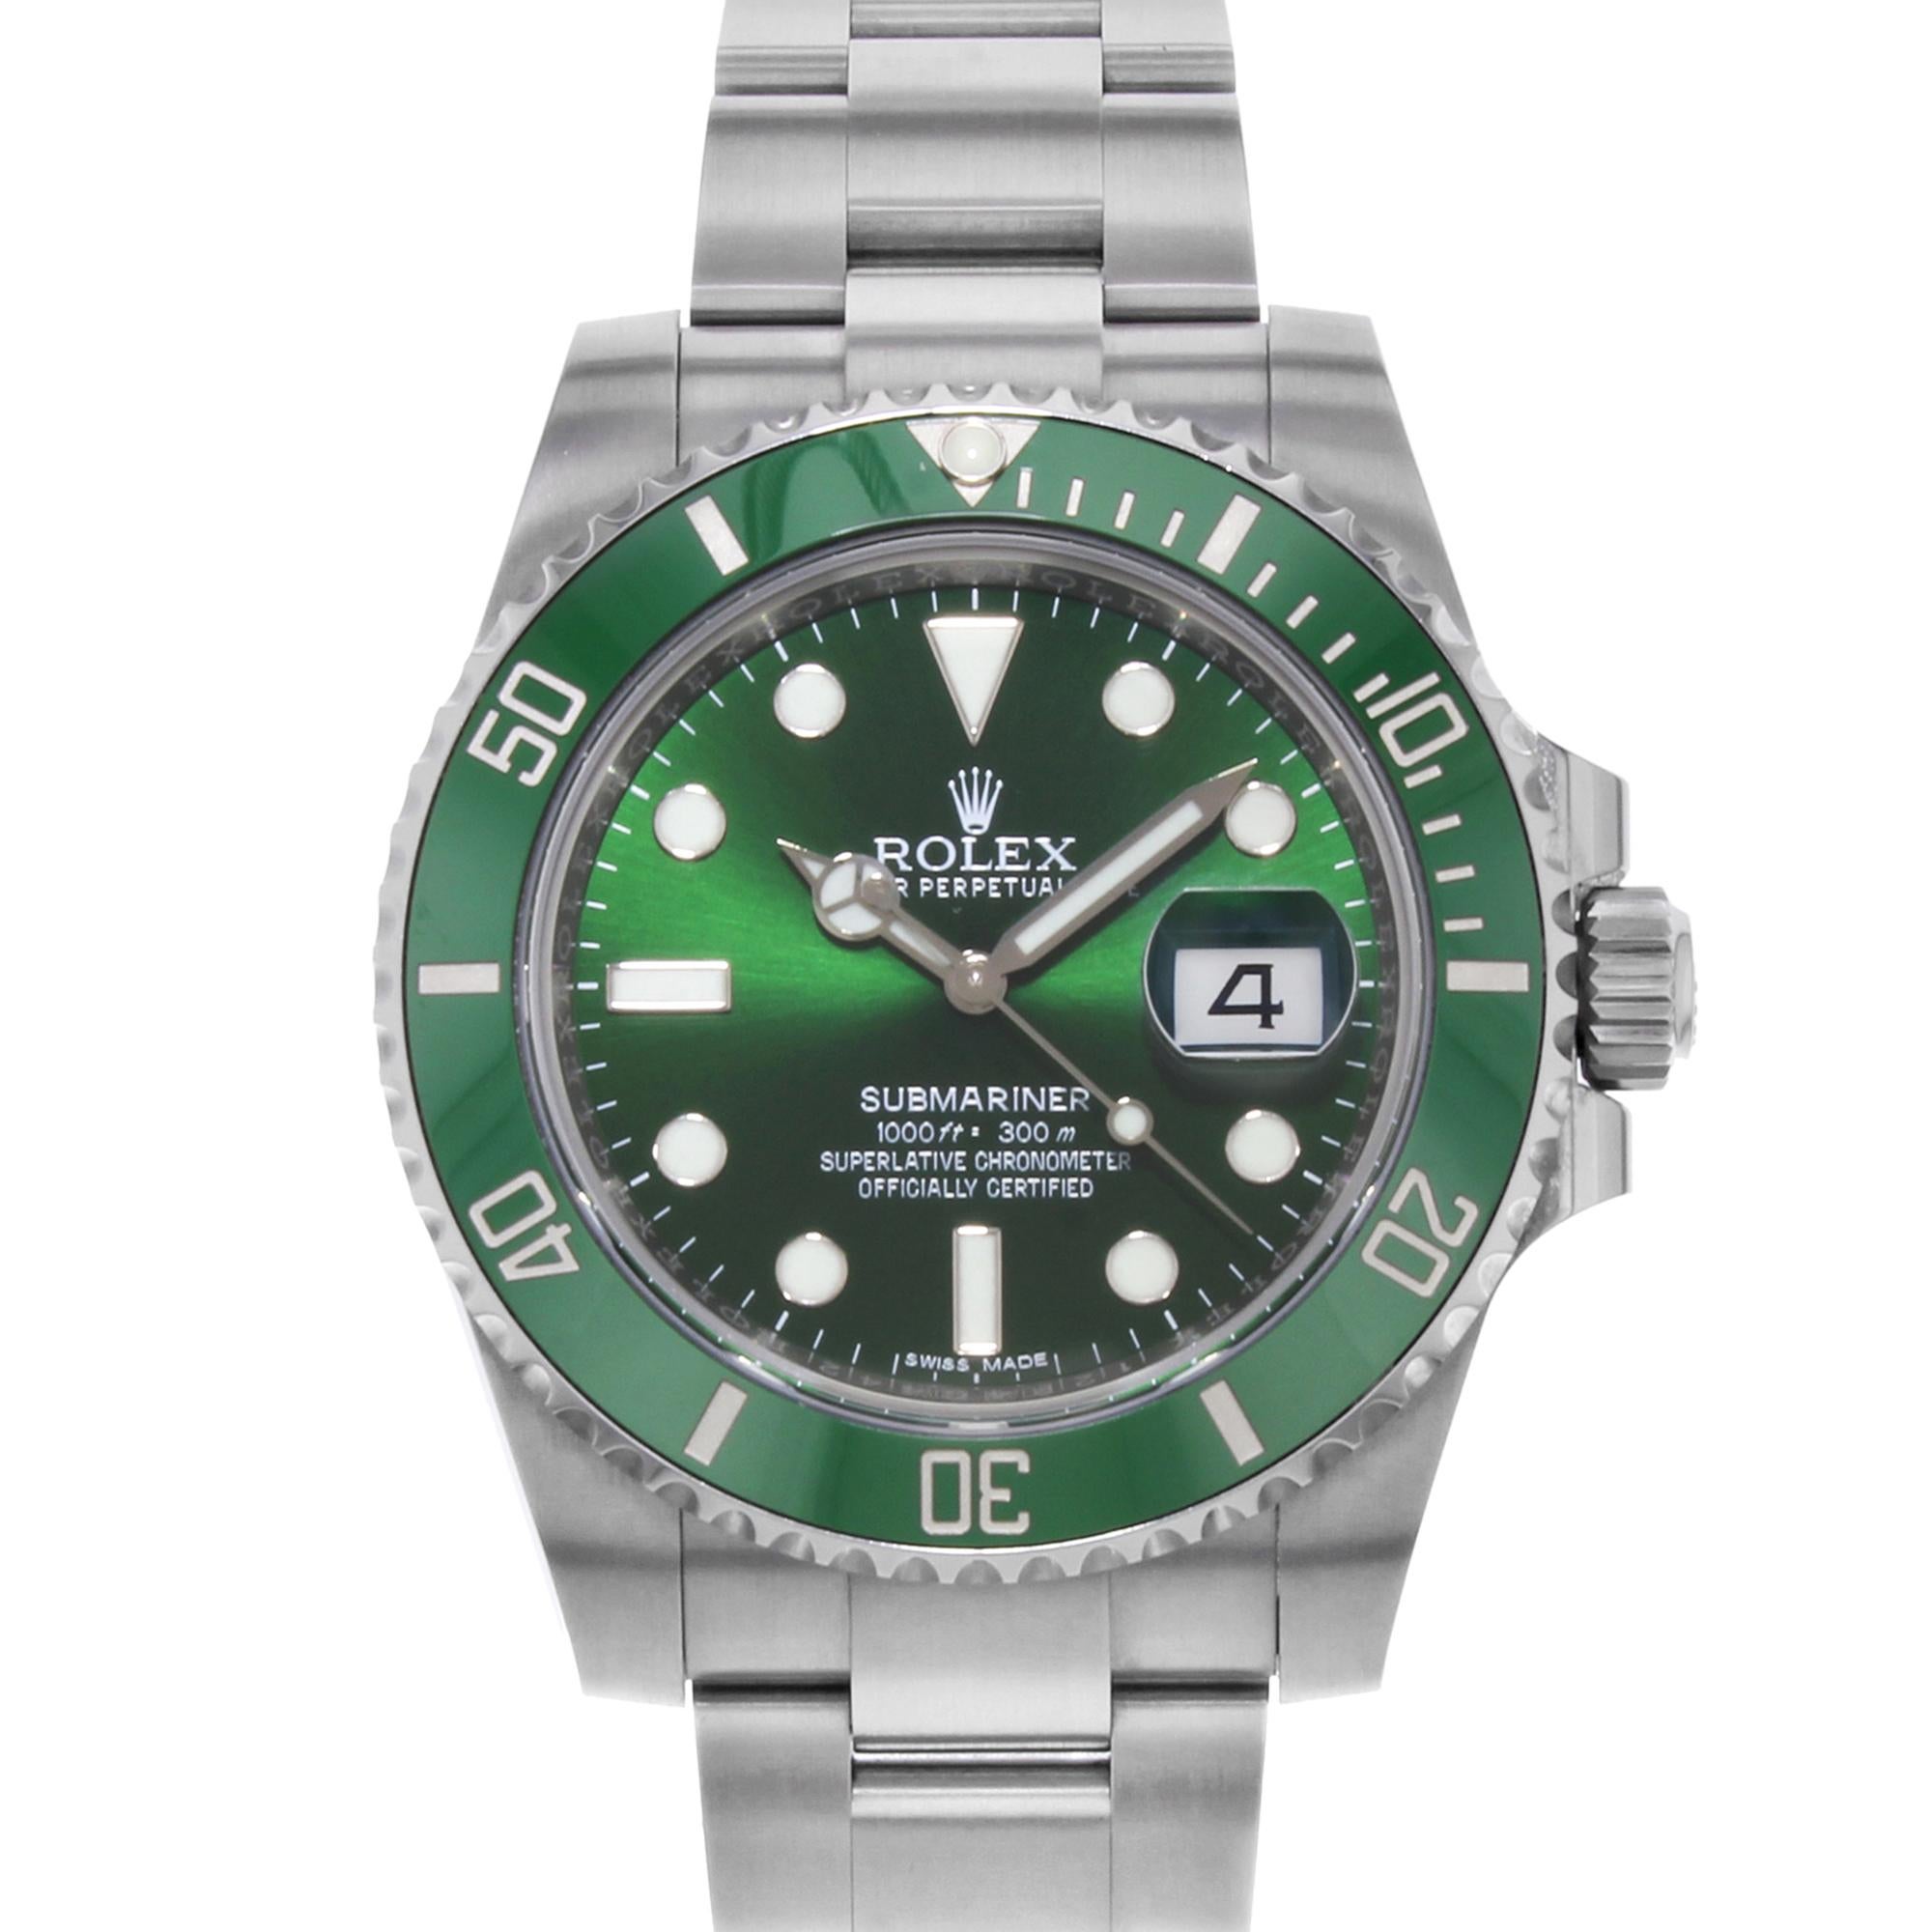 This pre-owned Rolex Submariner  116610LV  is a beautiful men's timepiece that is powered by mechanical (automatic) movement which is cased in a stainless steel case. It has a round shape face, date indicator dial and has hand sticks & dots style